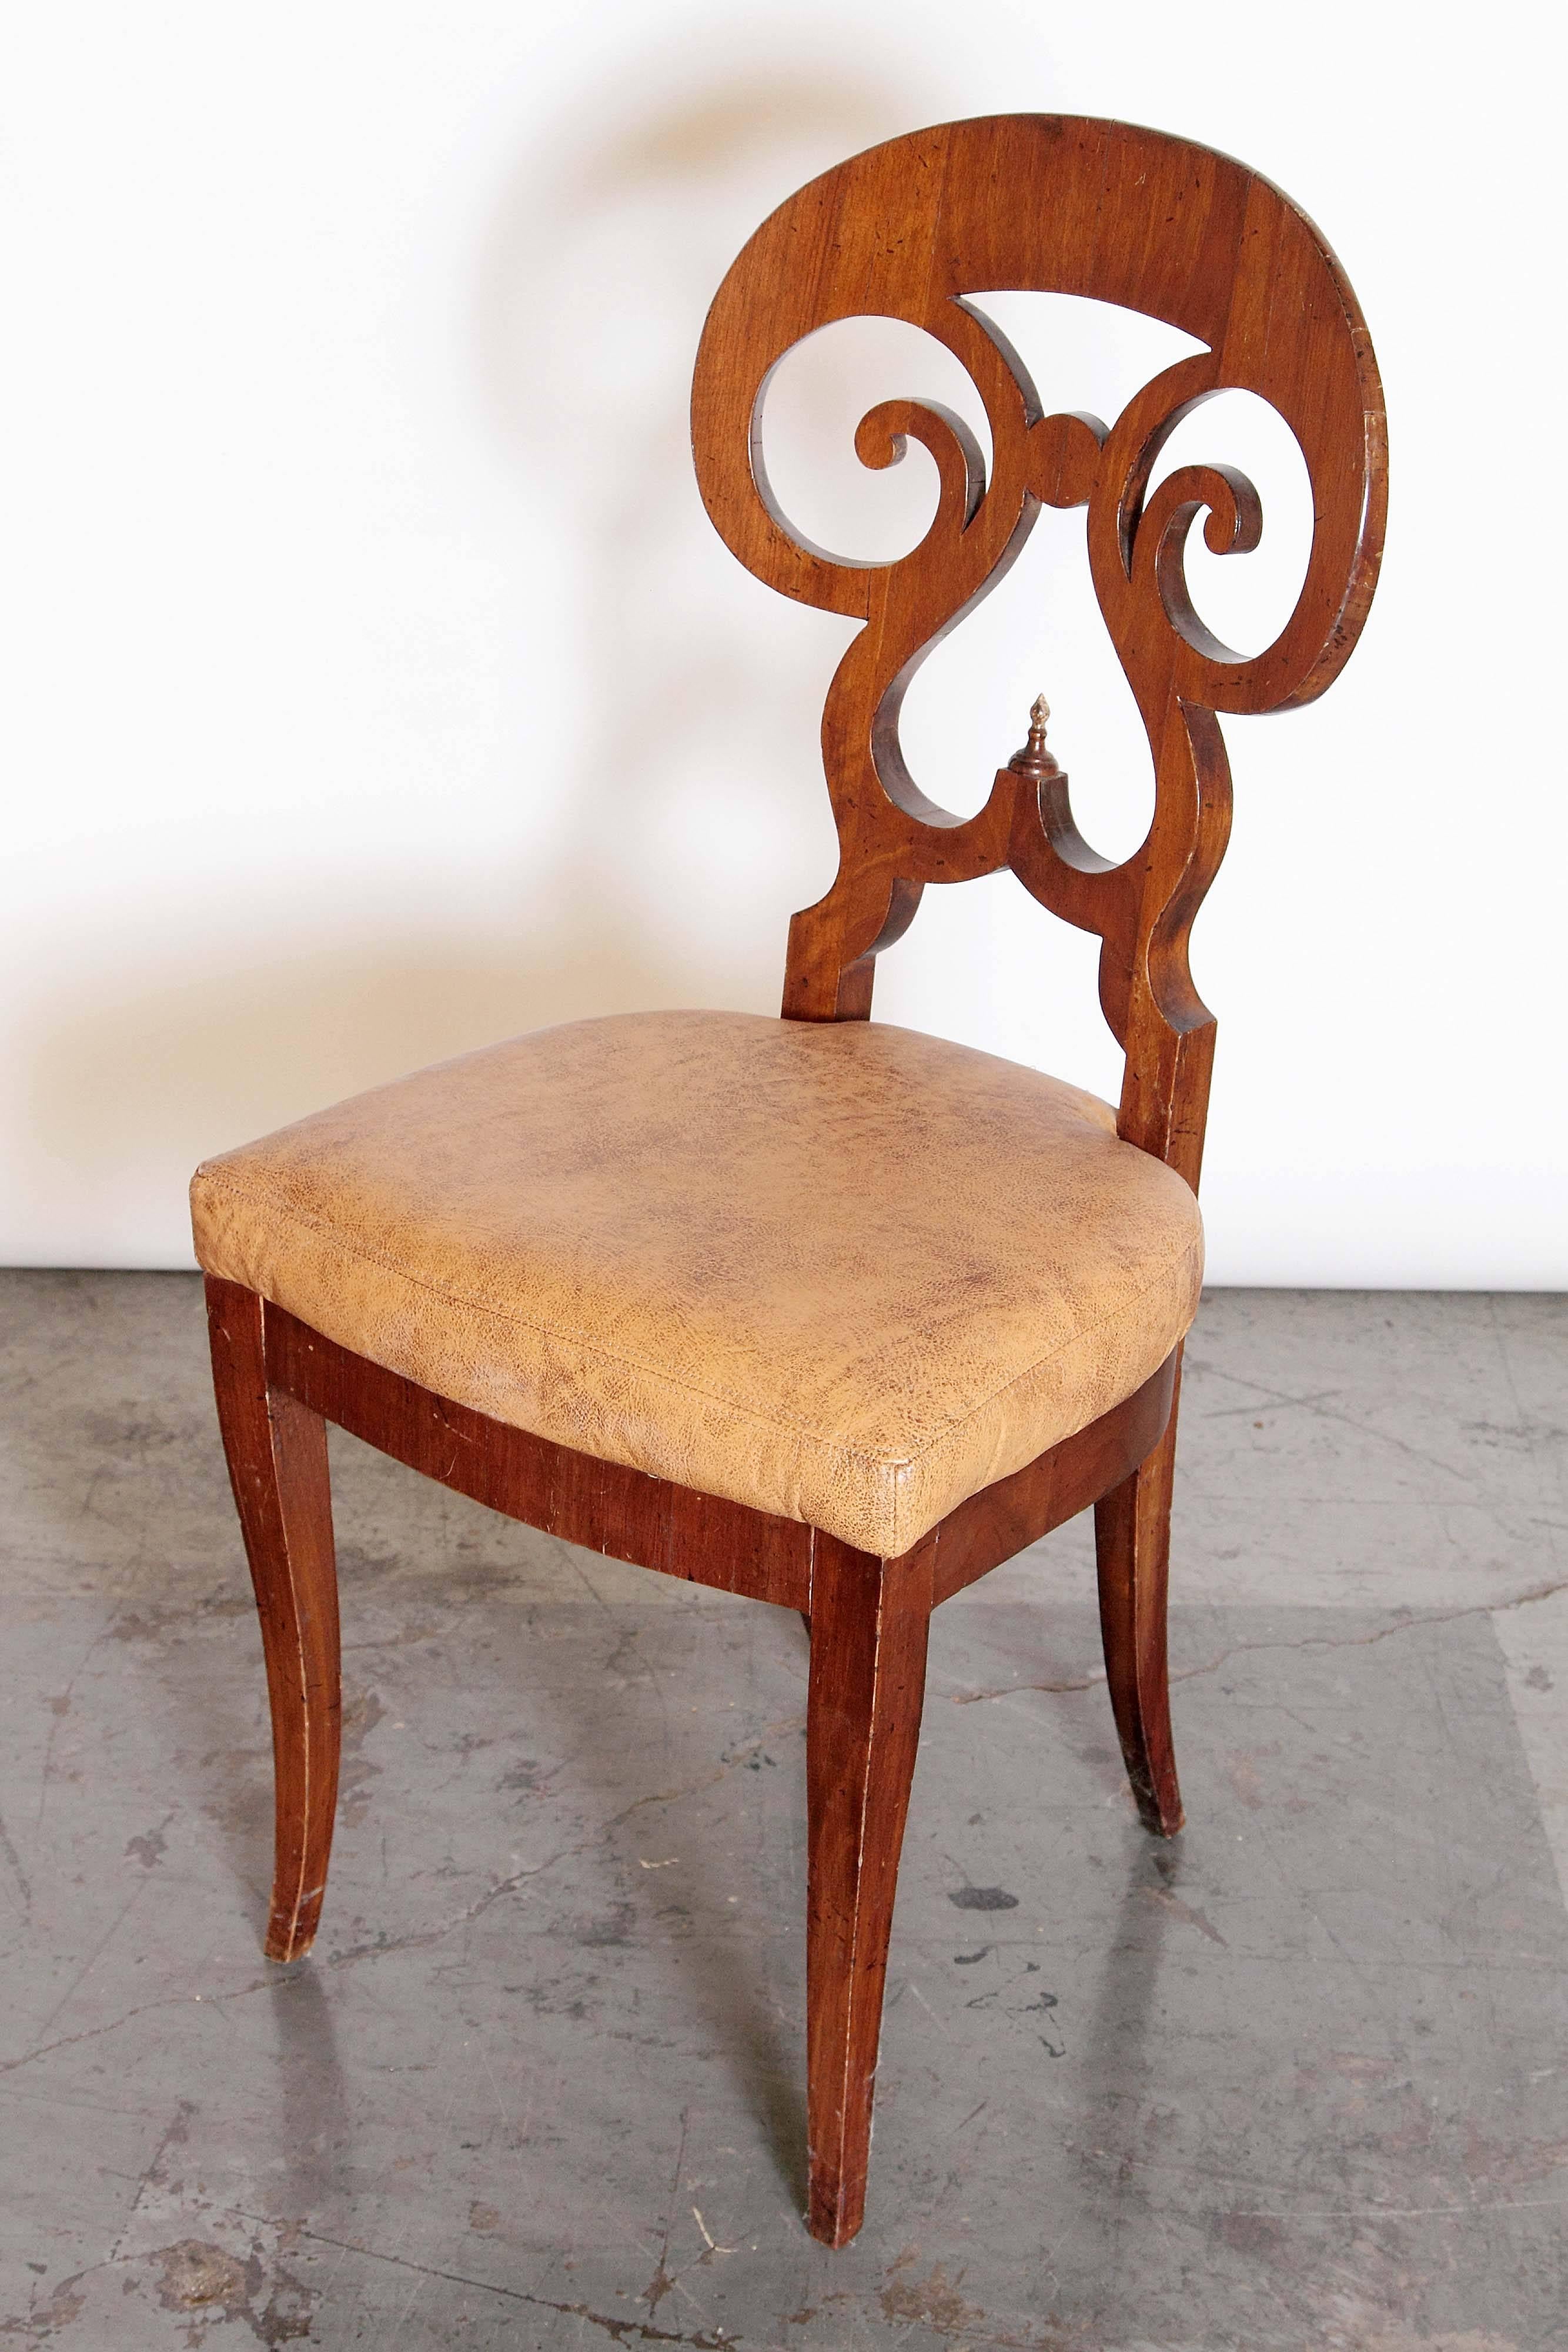 Beautiful 19th century Biedermeier style side chair in walnut with leather seat. After a model by Joseph Danhausser.
  